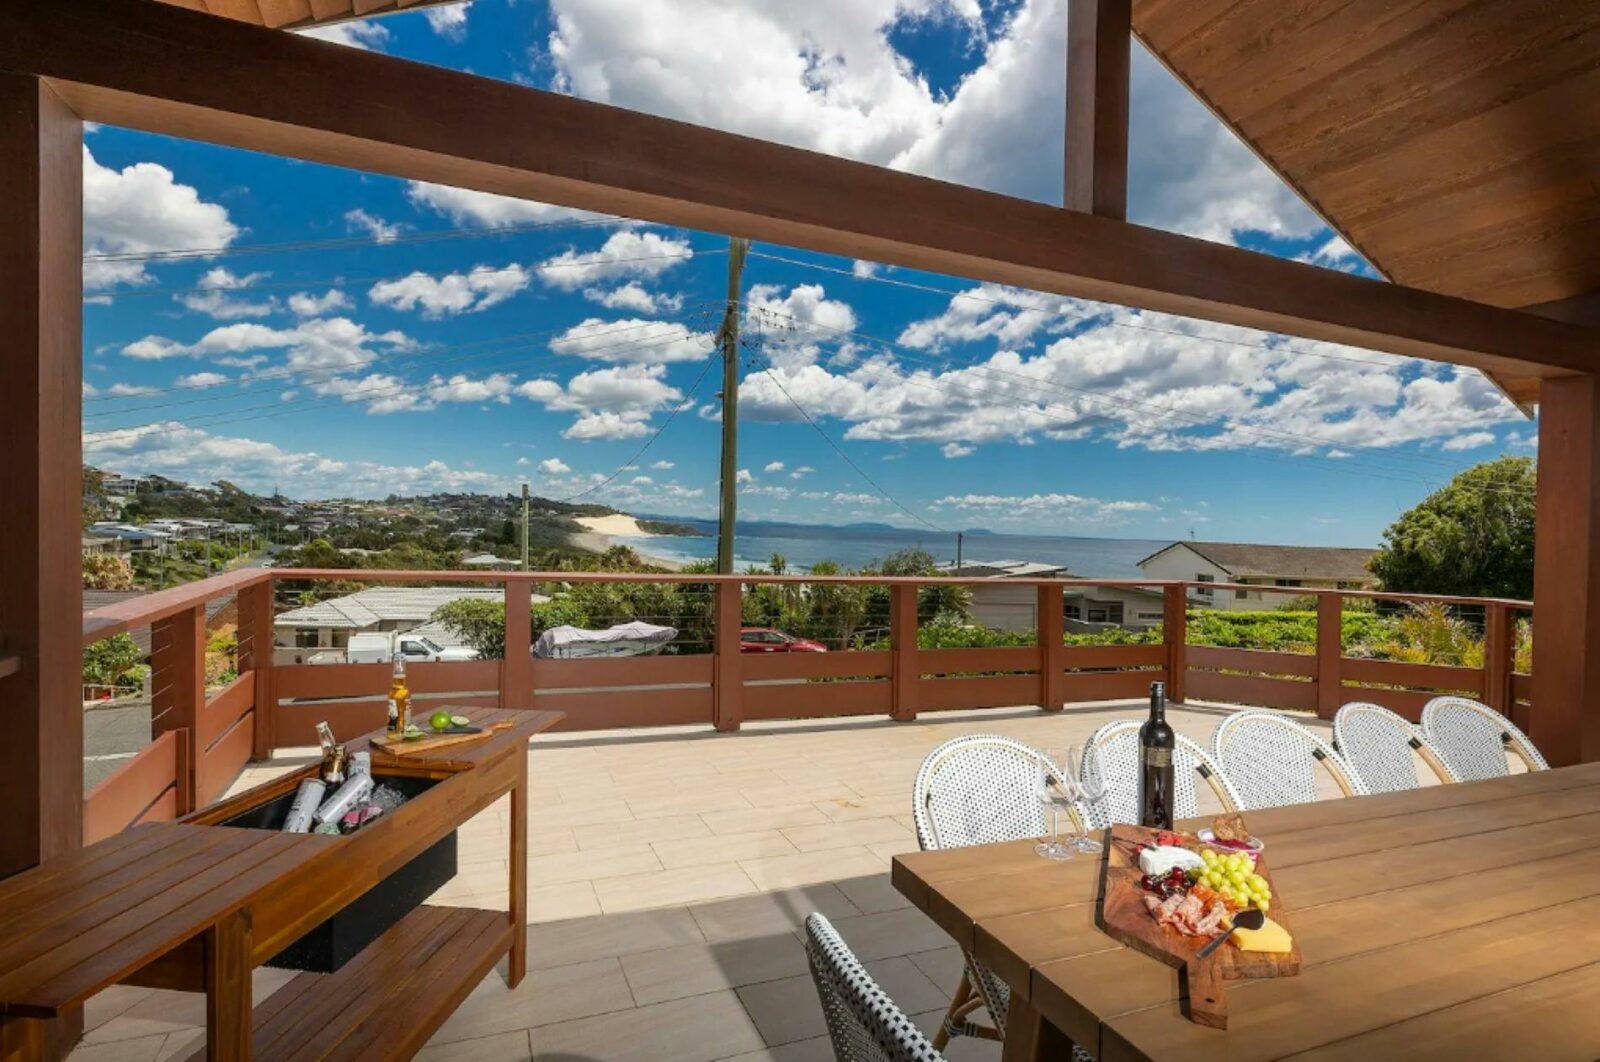 Spacious balcony with ocean views, dining setting